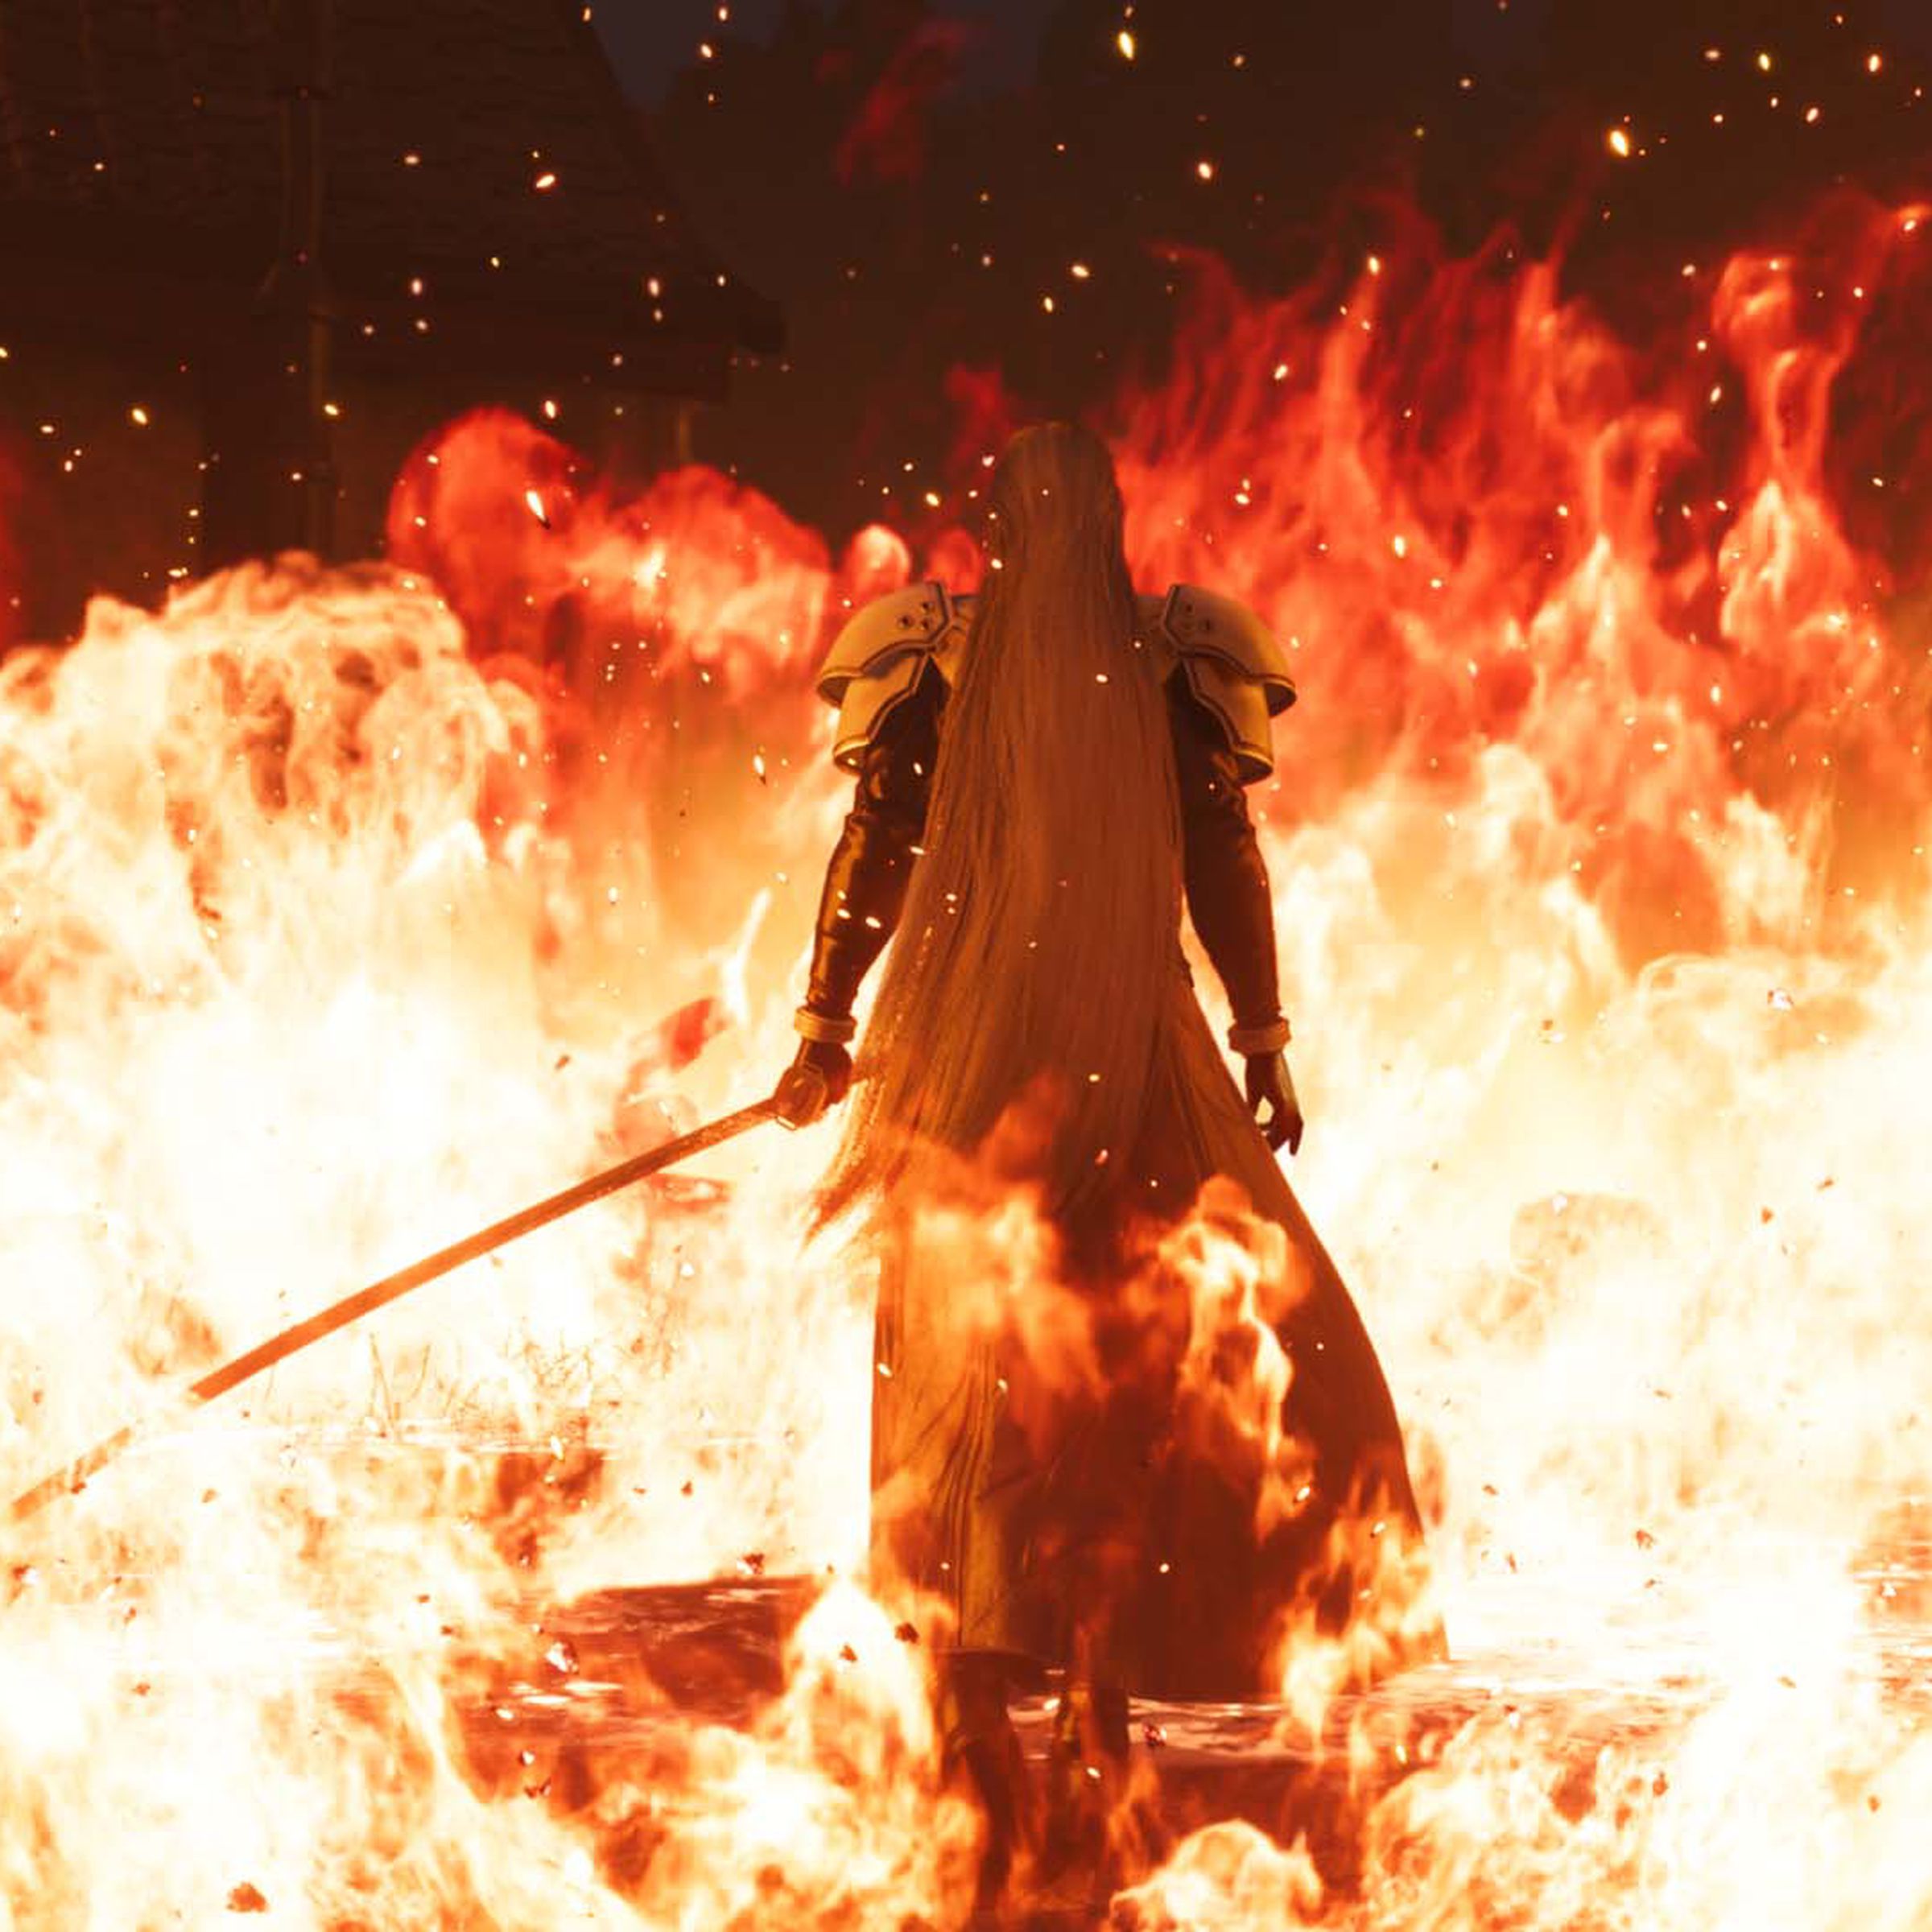 Screenshot from Final Fantasy VII: Rebirth featuring the iconic villain Sephiroth wreathed in flames with his back to the viewer.